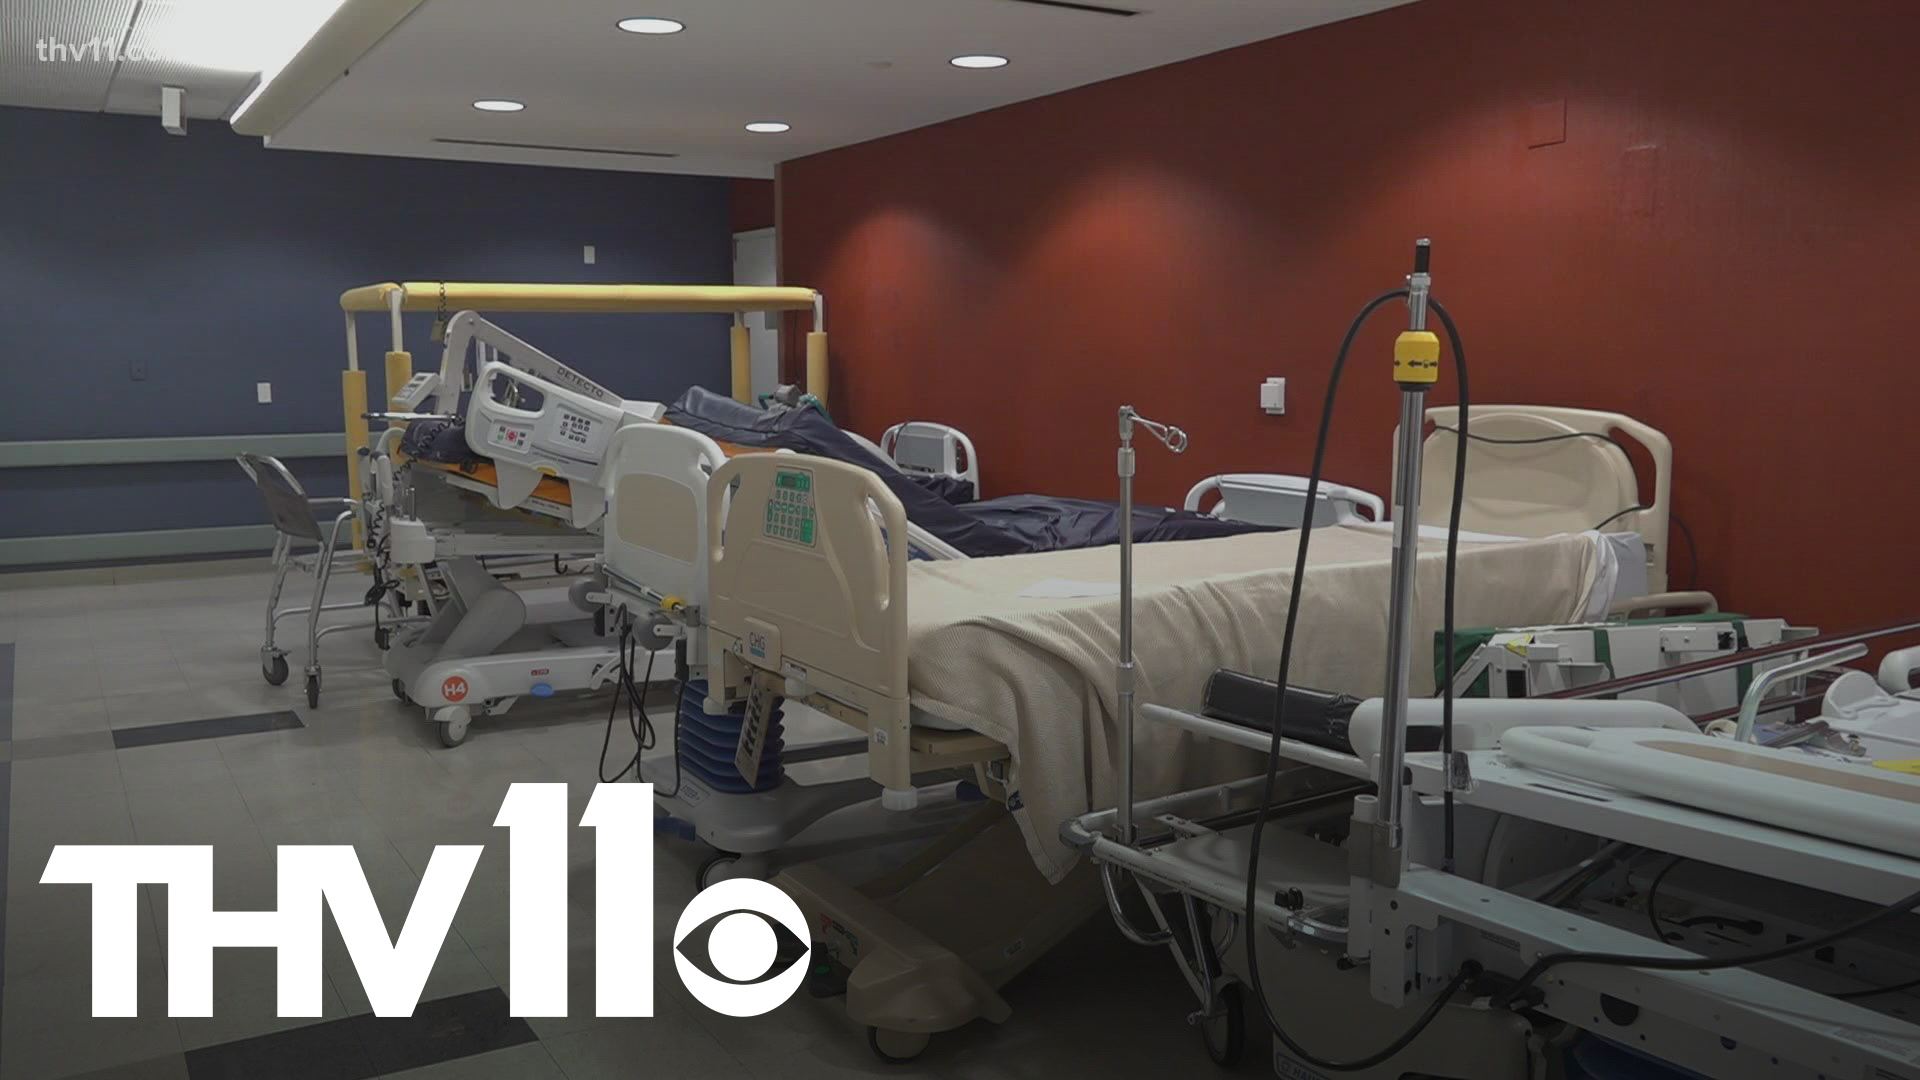 The Governor announced on Tuesday there are no more ICU beds for COVID patients in Arkansas. Those numbers can change daily, but hospitals are relieving the strain.